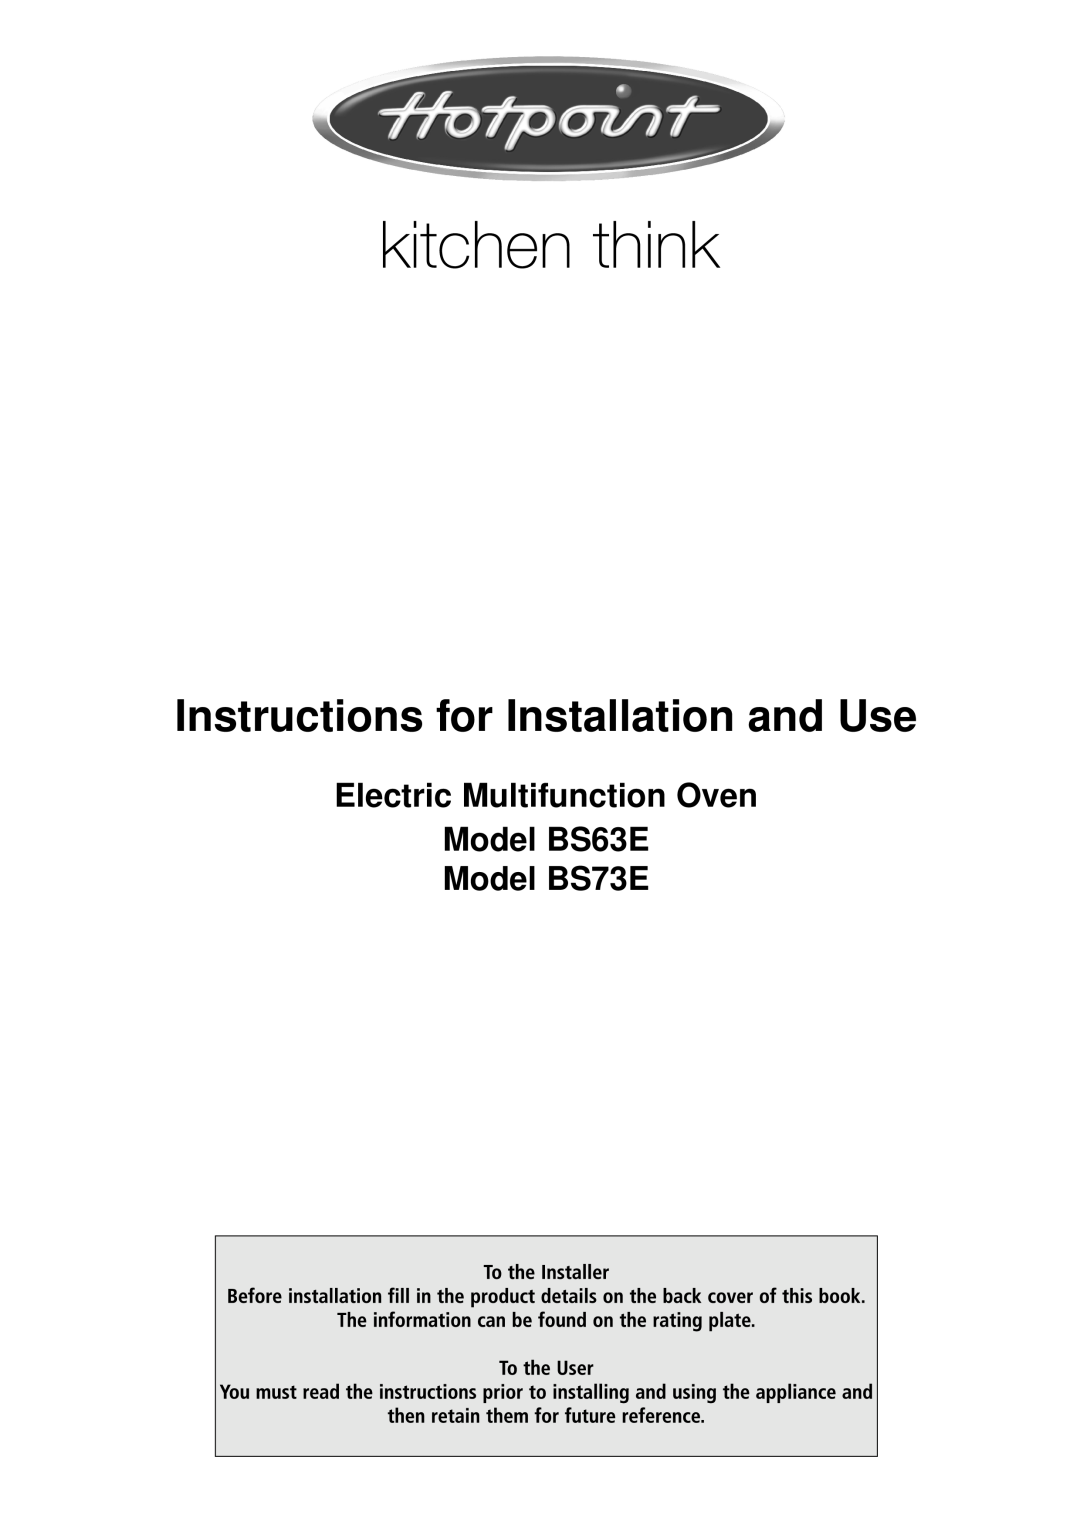 Hotpoint manual Electric Multifunction Oven Model BS63E Model BS73E, Instructions for Installation and Use 